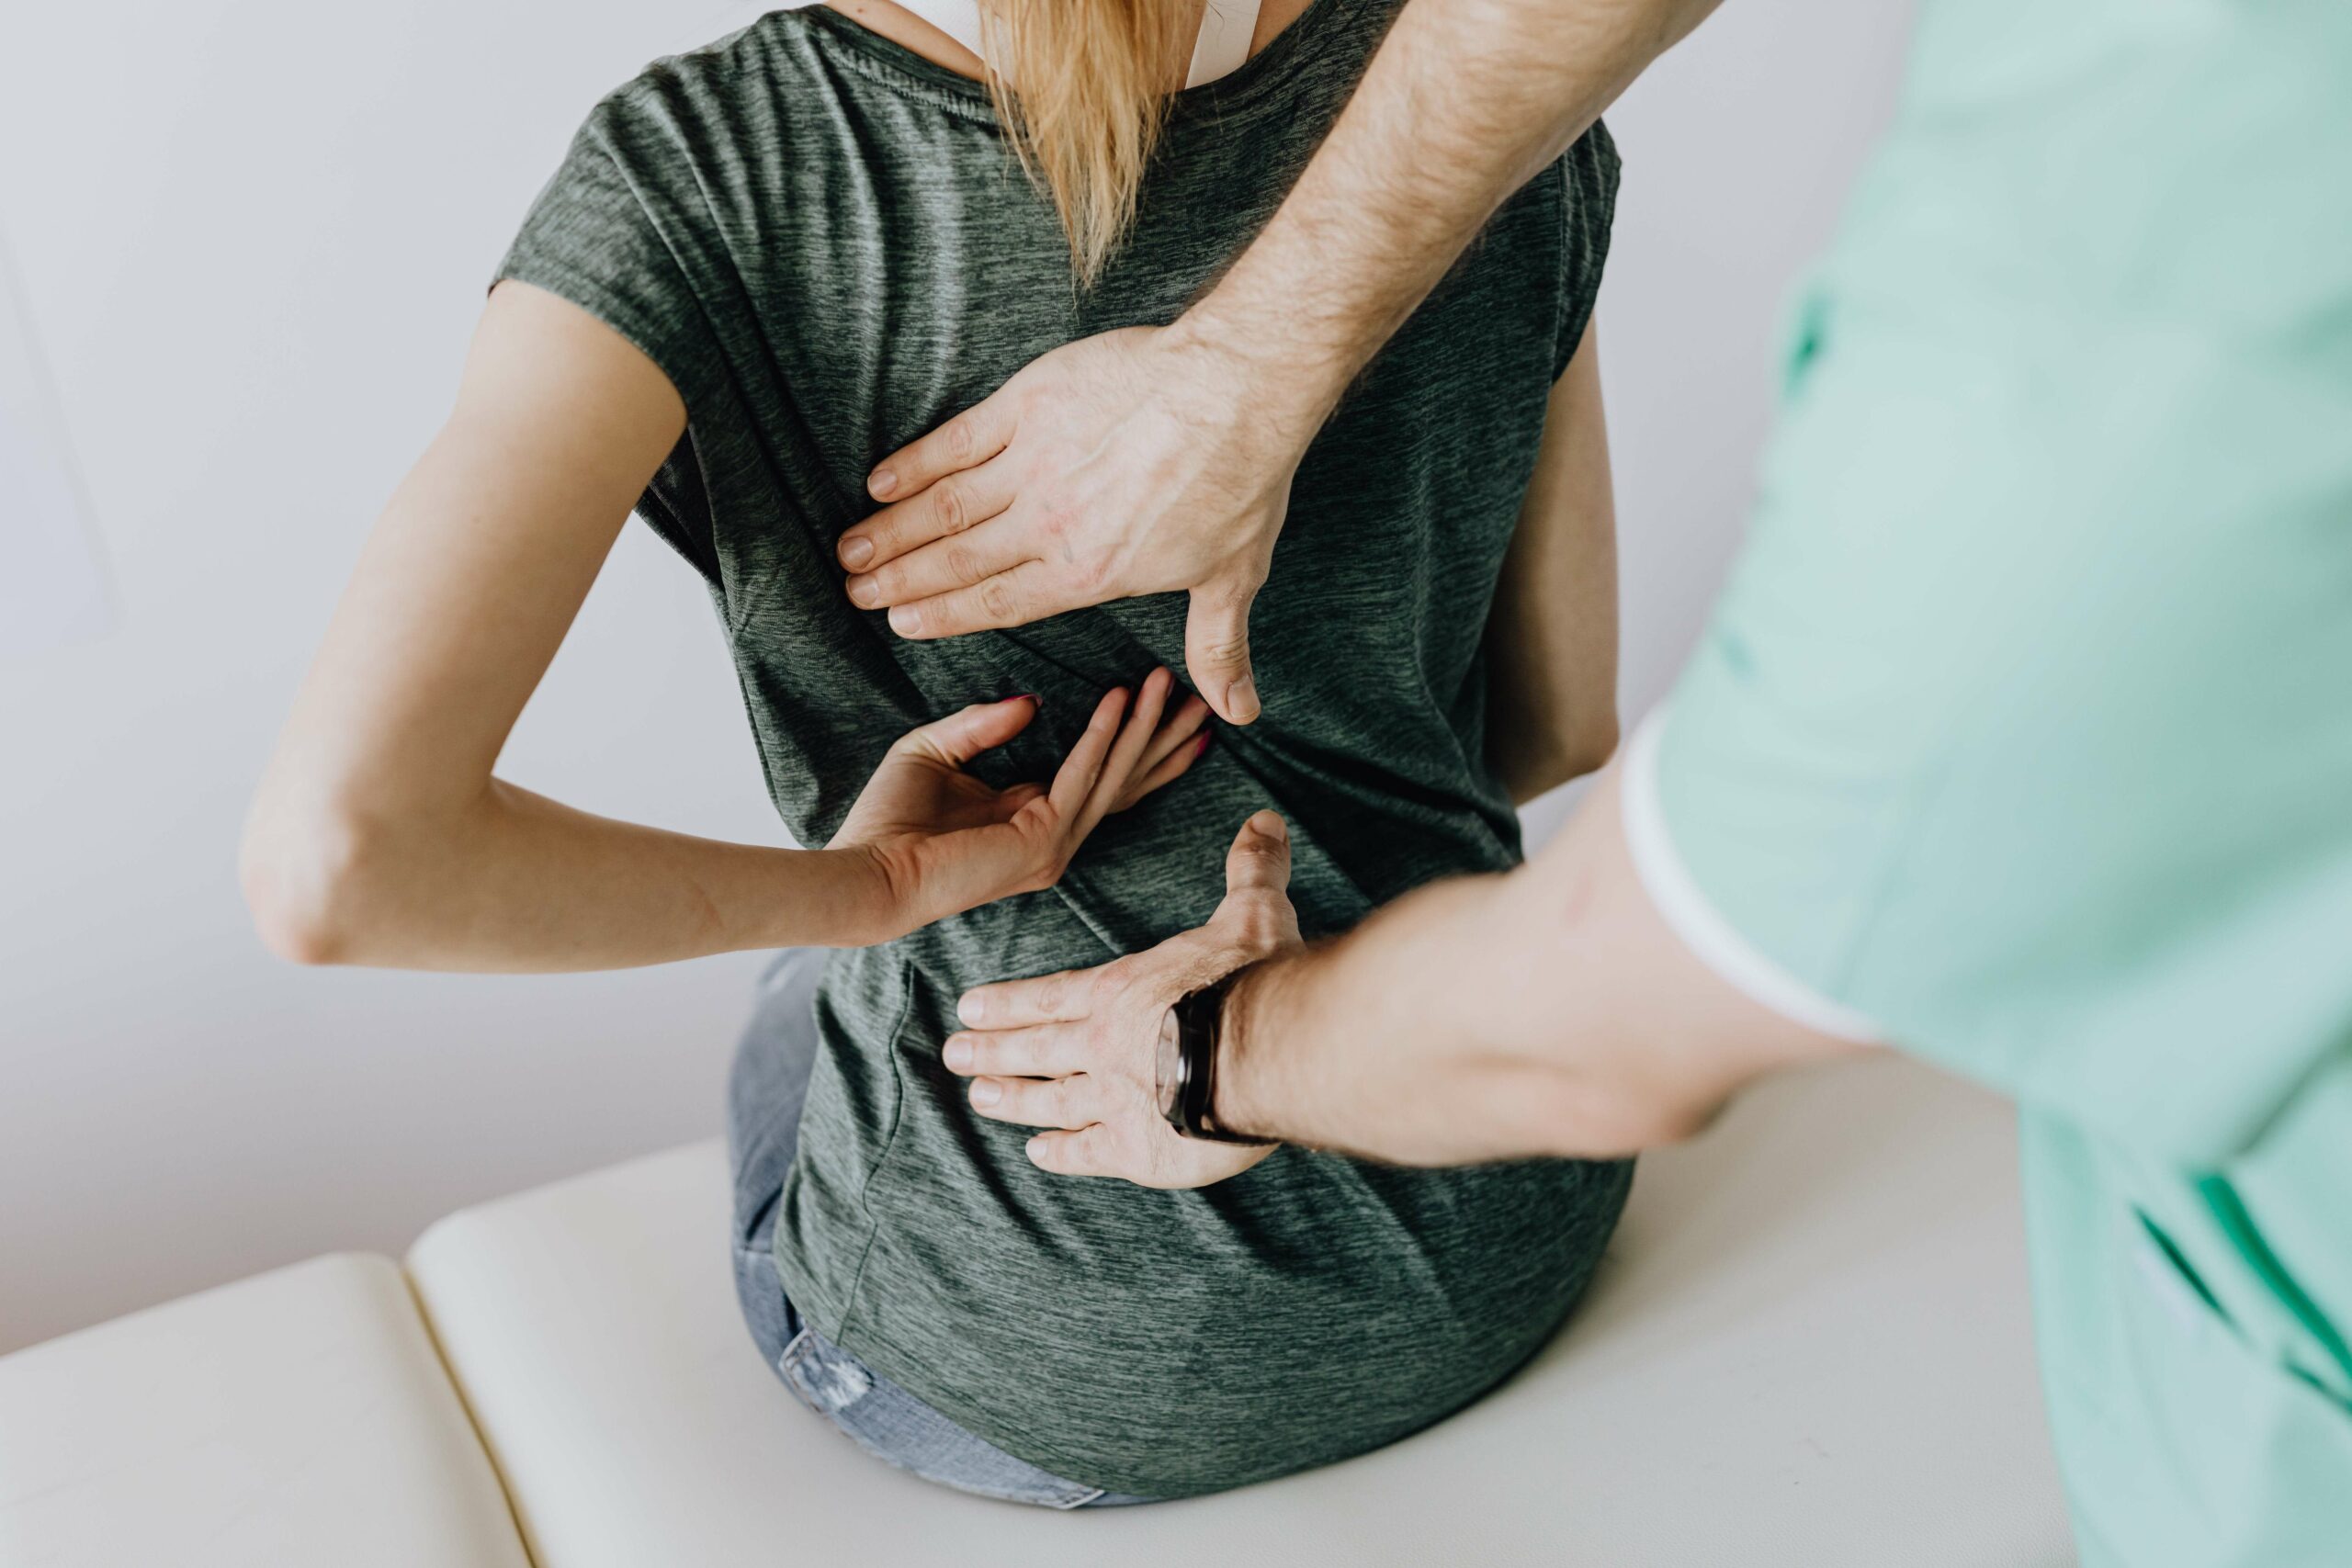 A pelvic floor physical therapist examines a woman who is dealing with painful bladder syndrome in Washington, DC.